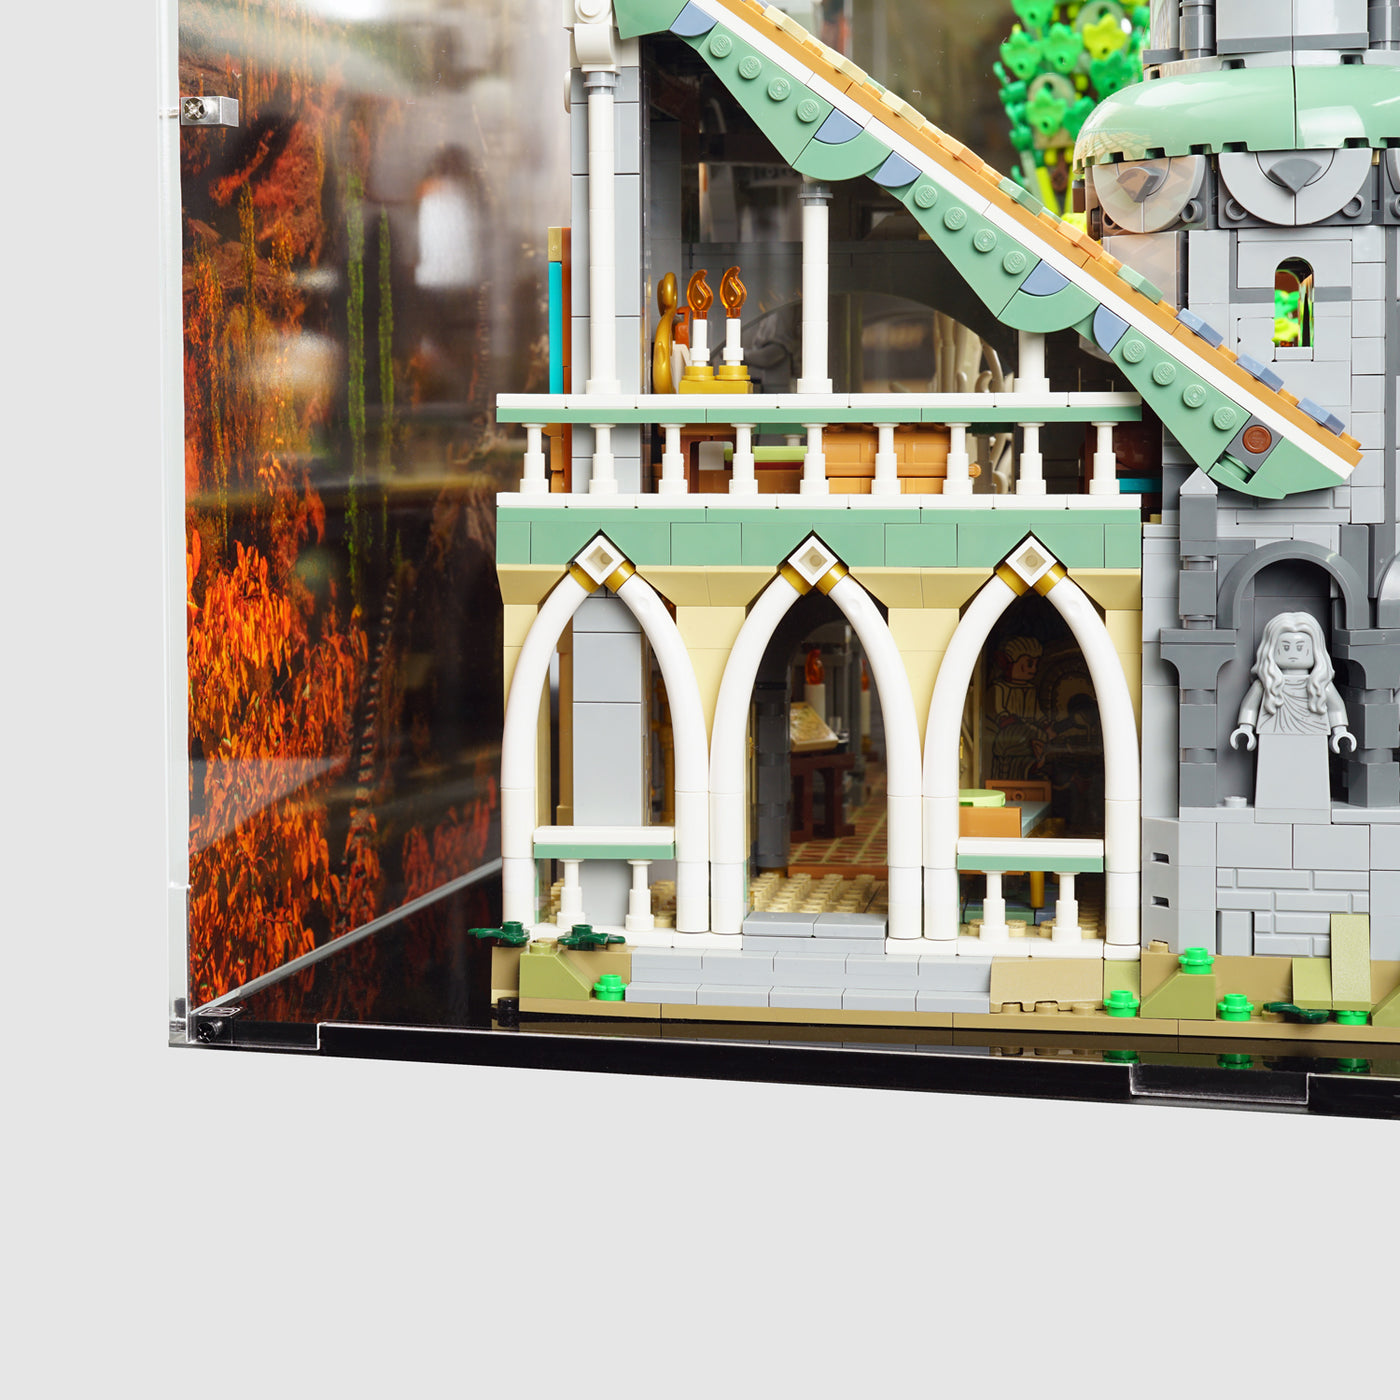 Acrylic Displays for your Lego Models-Lego 10316 Lord of the Rings